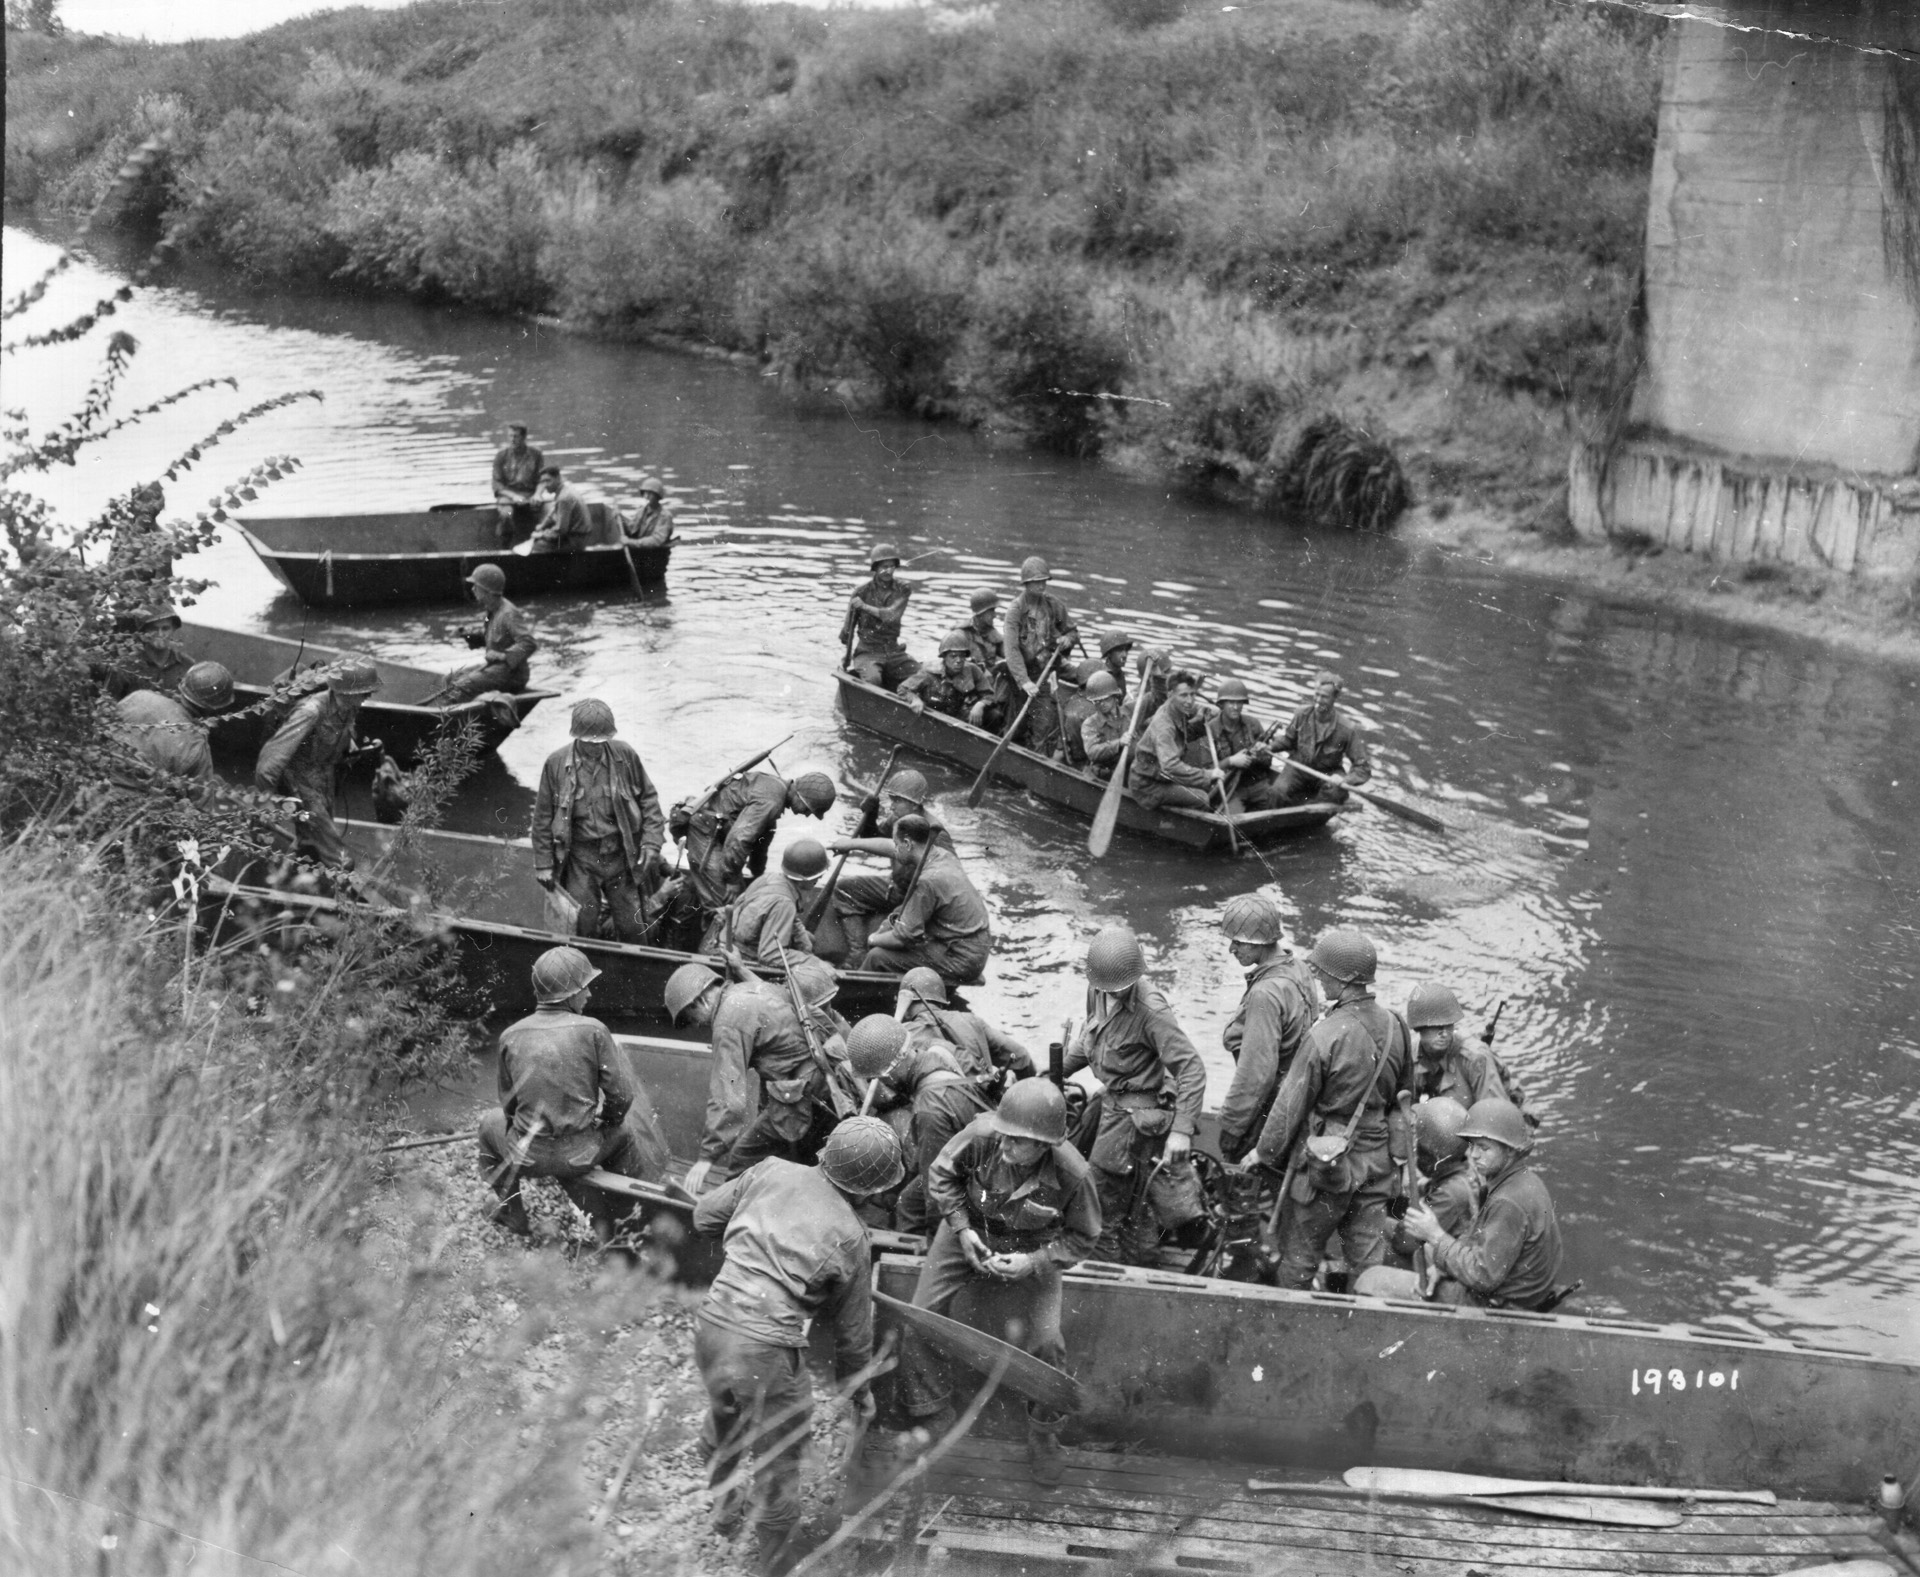 American soldiers board small boats for the movement across the Seine River in northern France on August 20, 1944. This crossing took place near the town of Mantes, a short distance from the French capital of Paris, which was liberated days later.